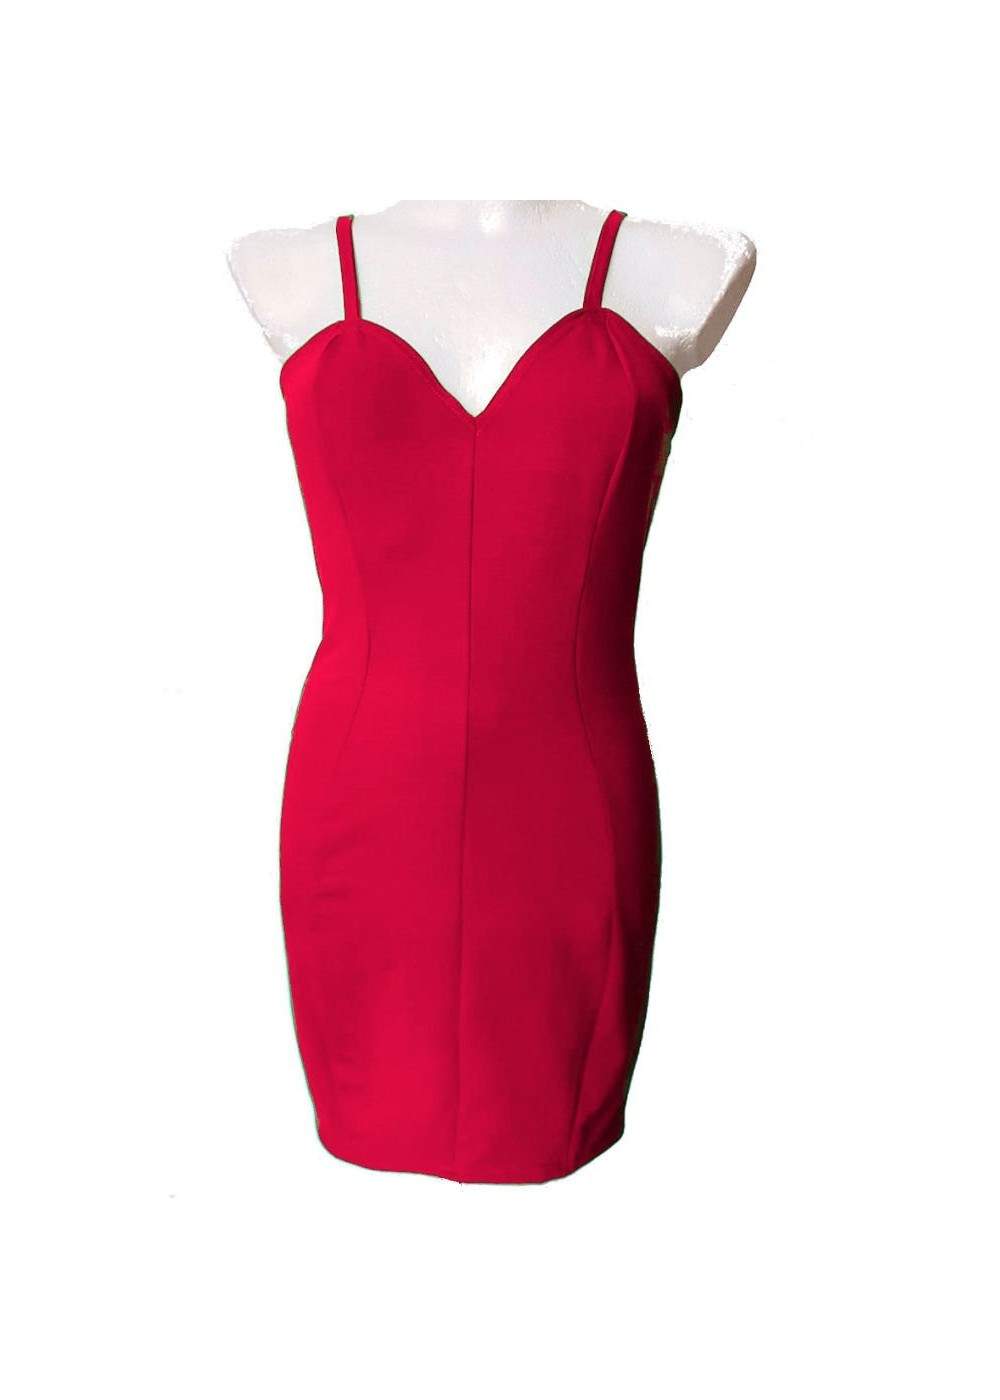 Red Stretch Cotton Strap Dress CockPart Dress Size 34 - 52 35,00 € - 